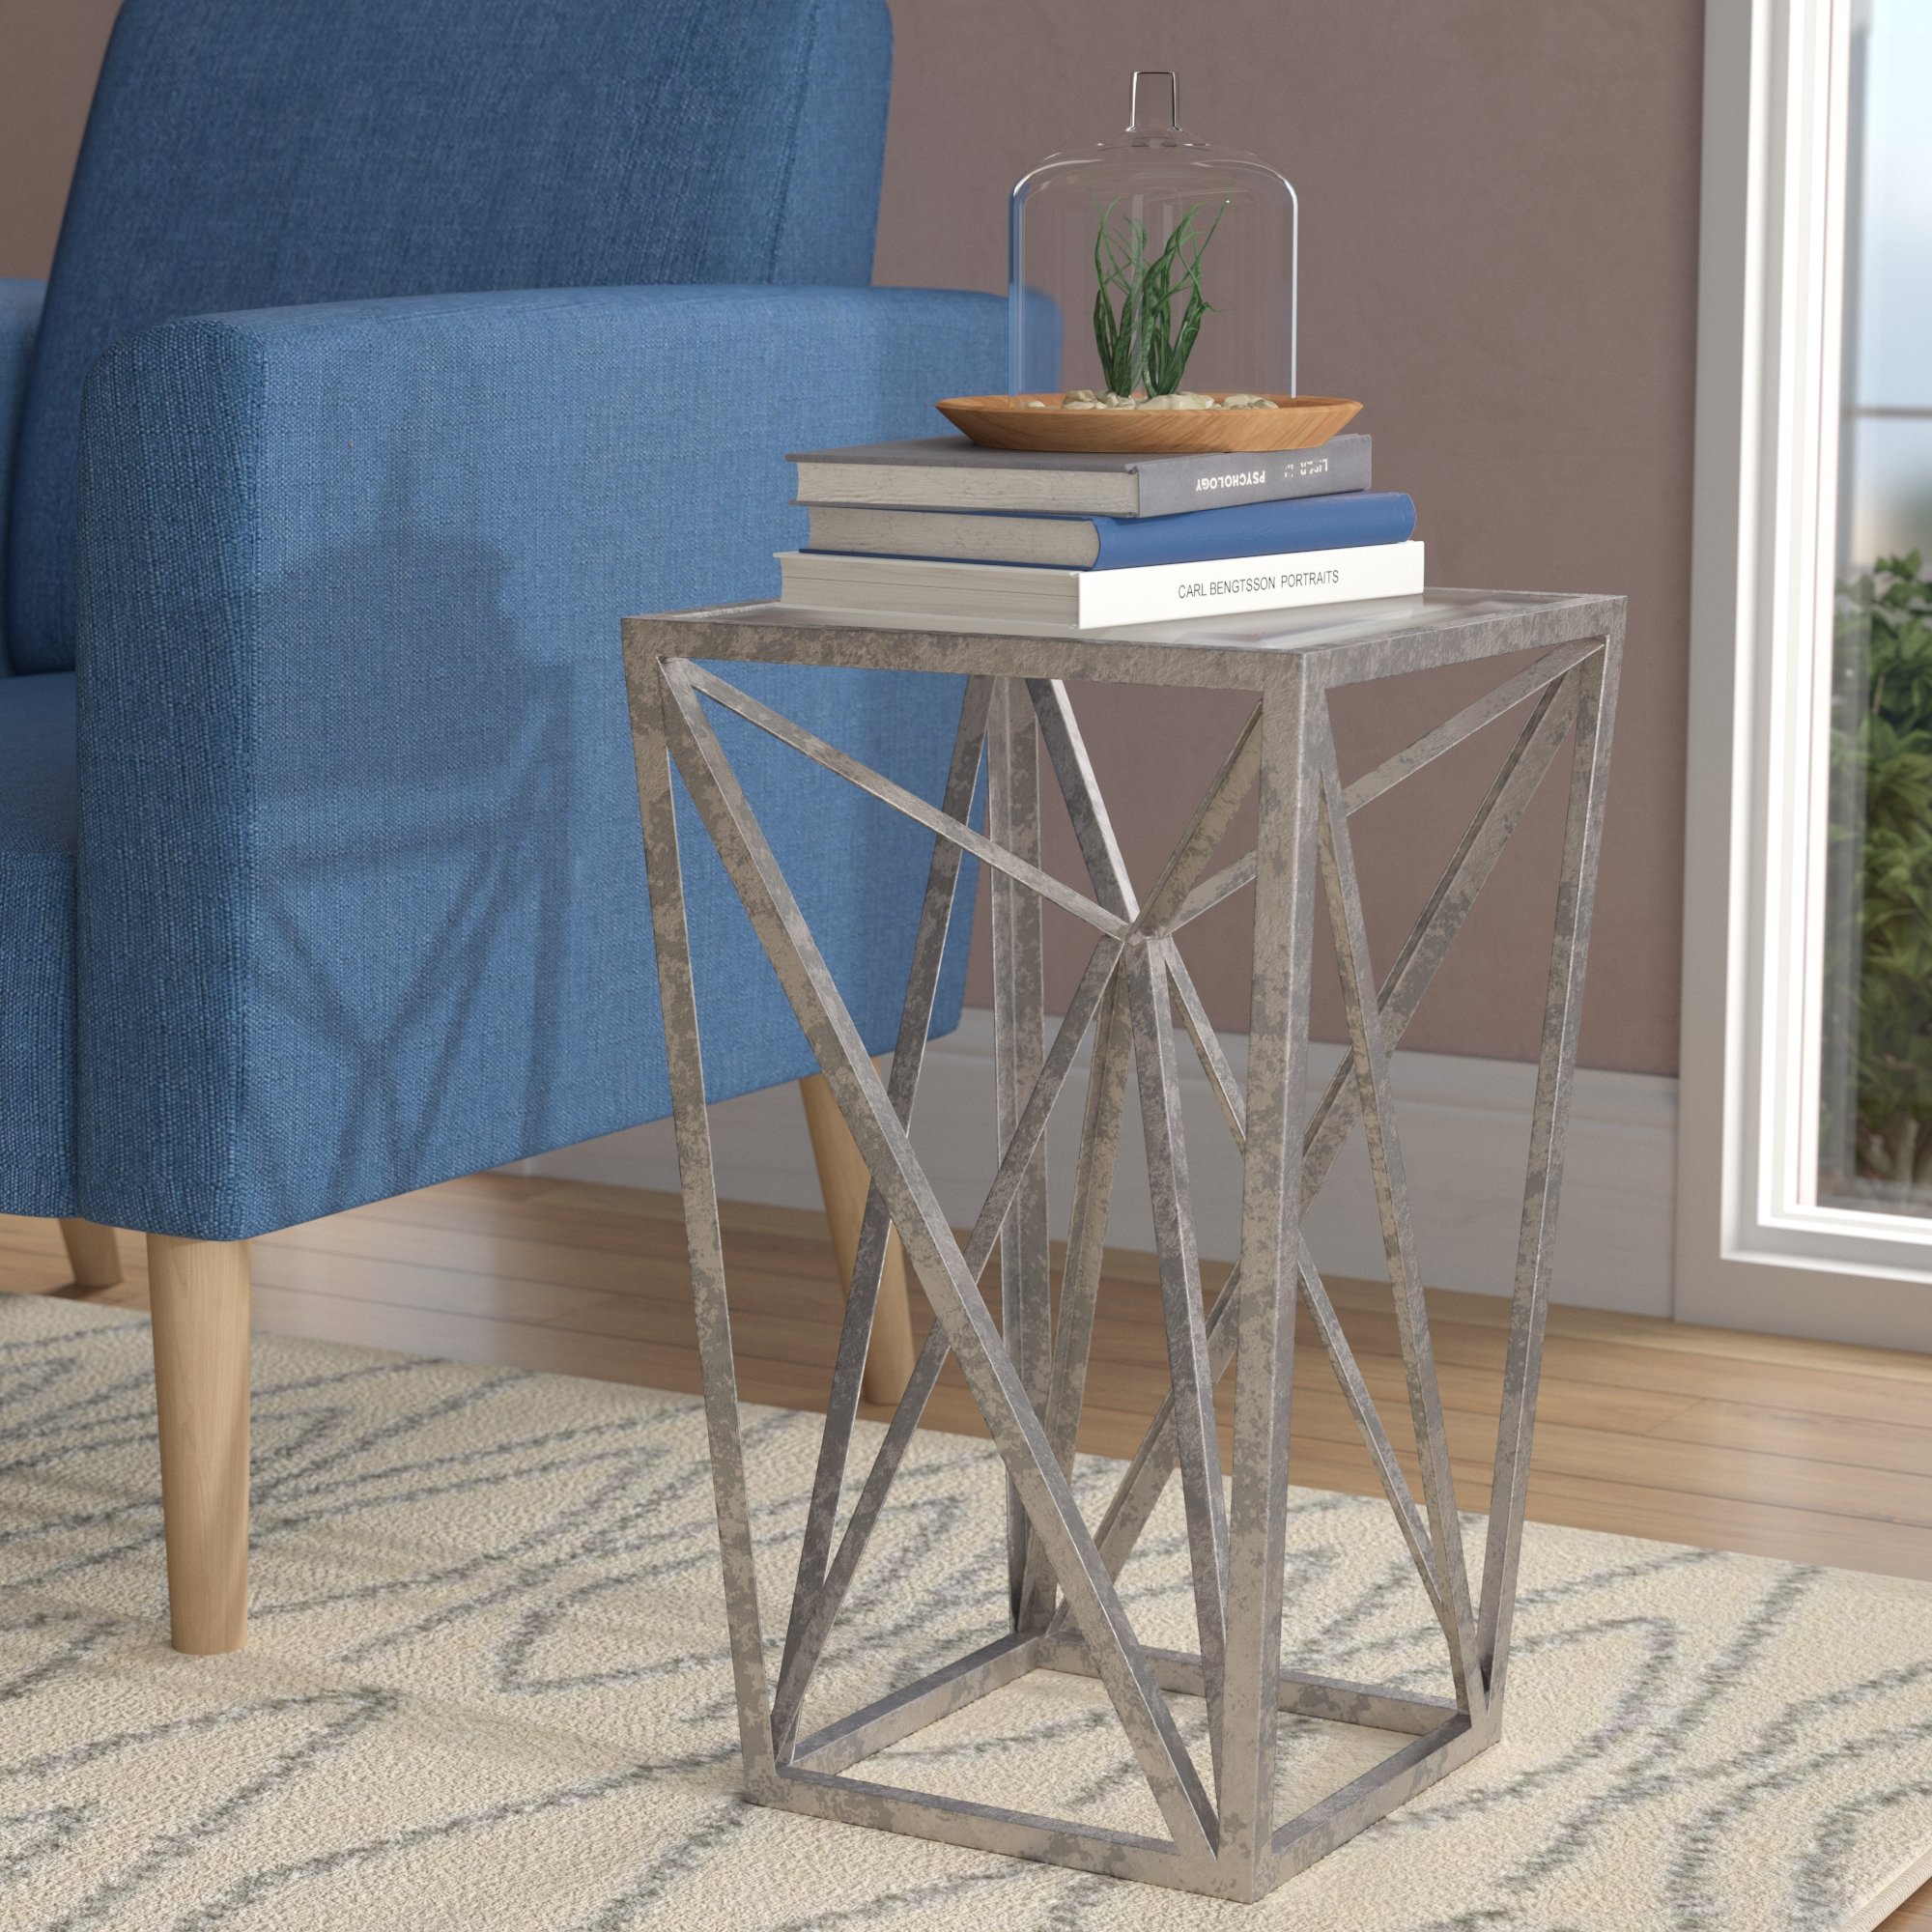 small end tables you love stenson table patchen accent quickview side cabinet collections marble pedestal coffee patio furniture clearance very oak console with cabinets dark blue